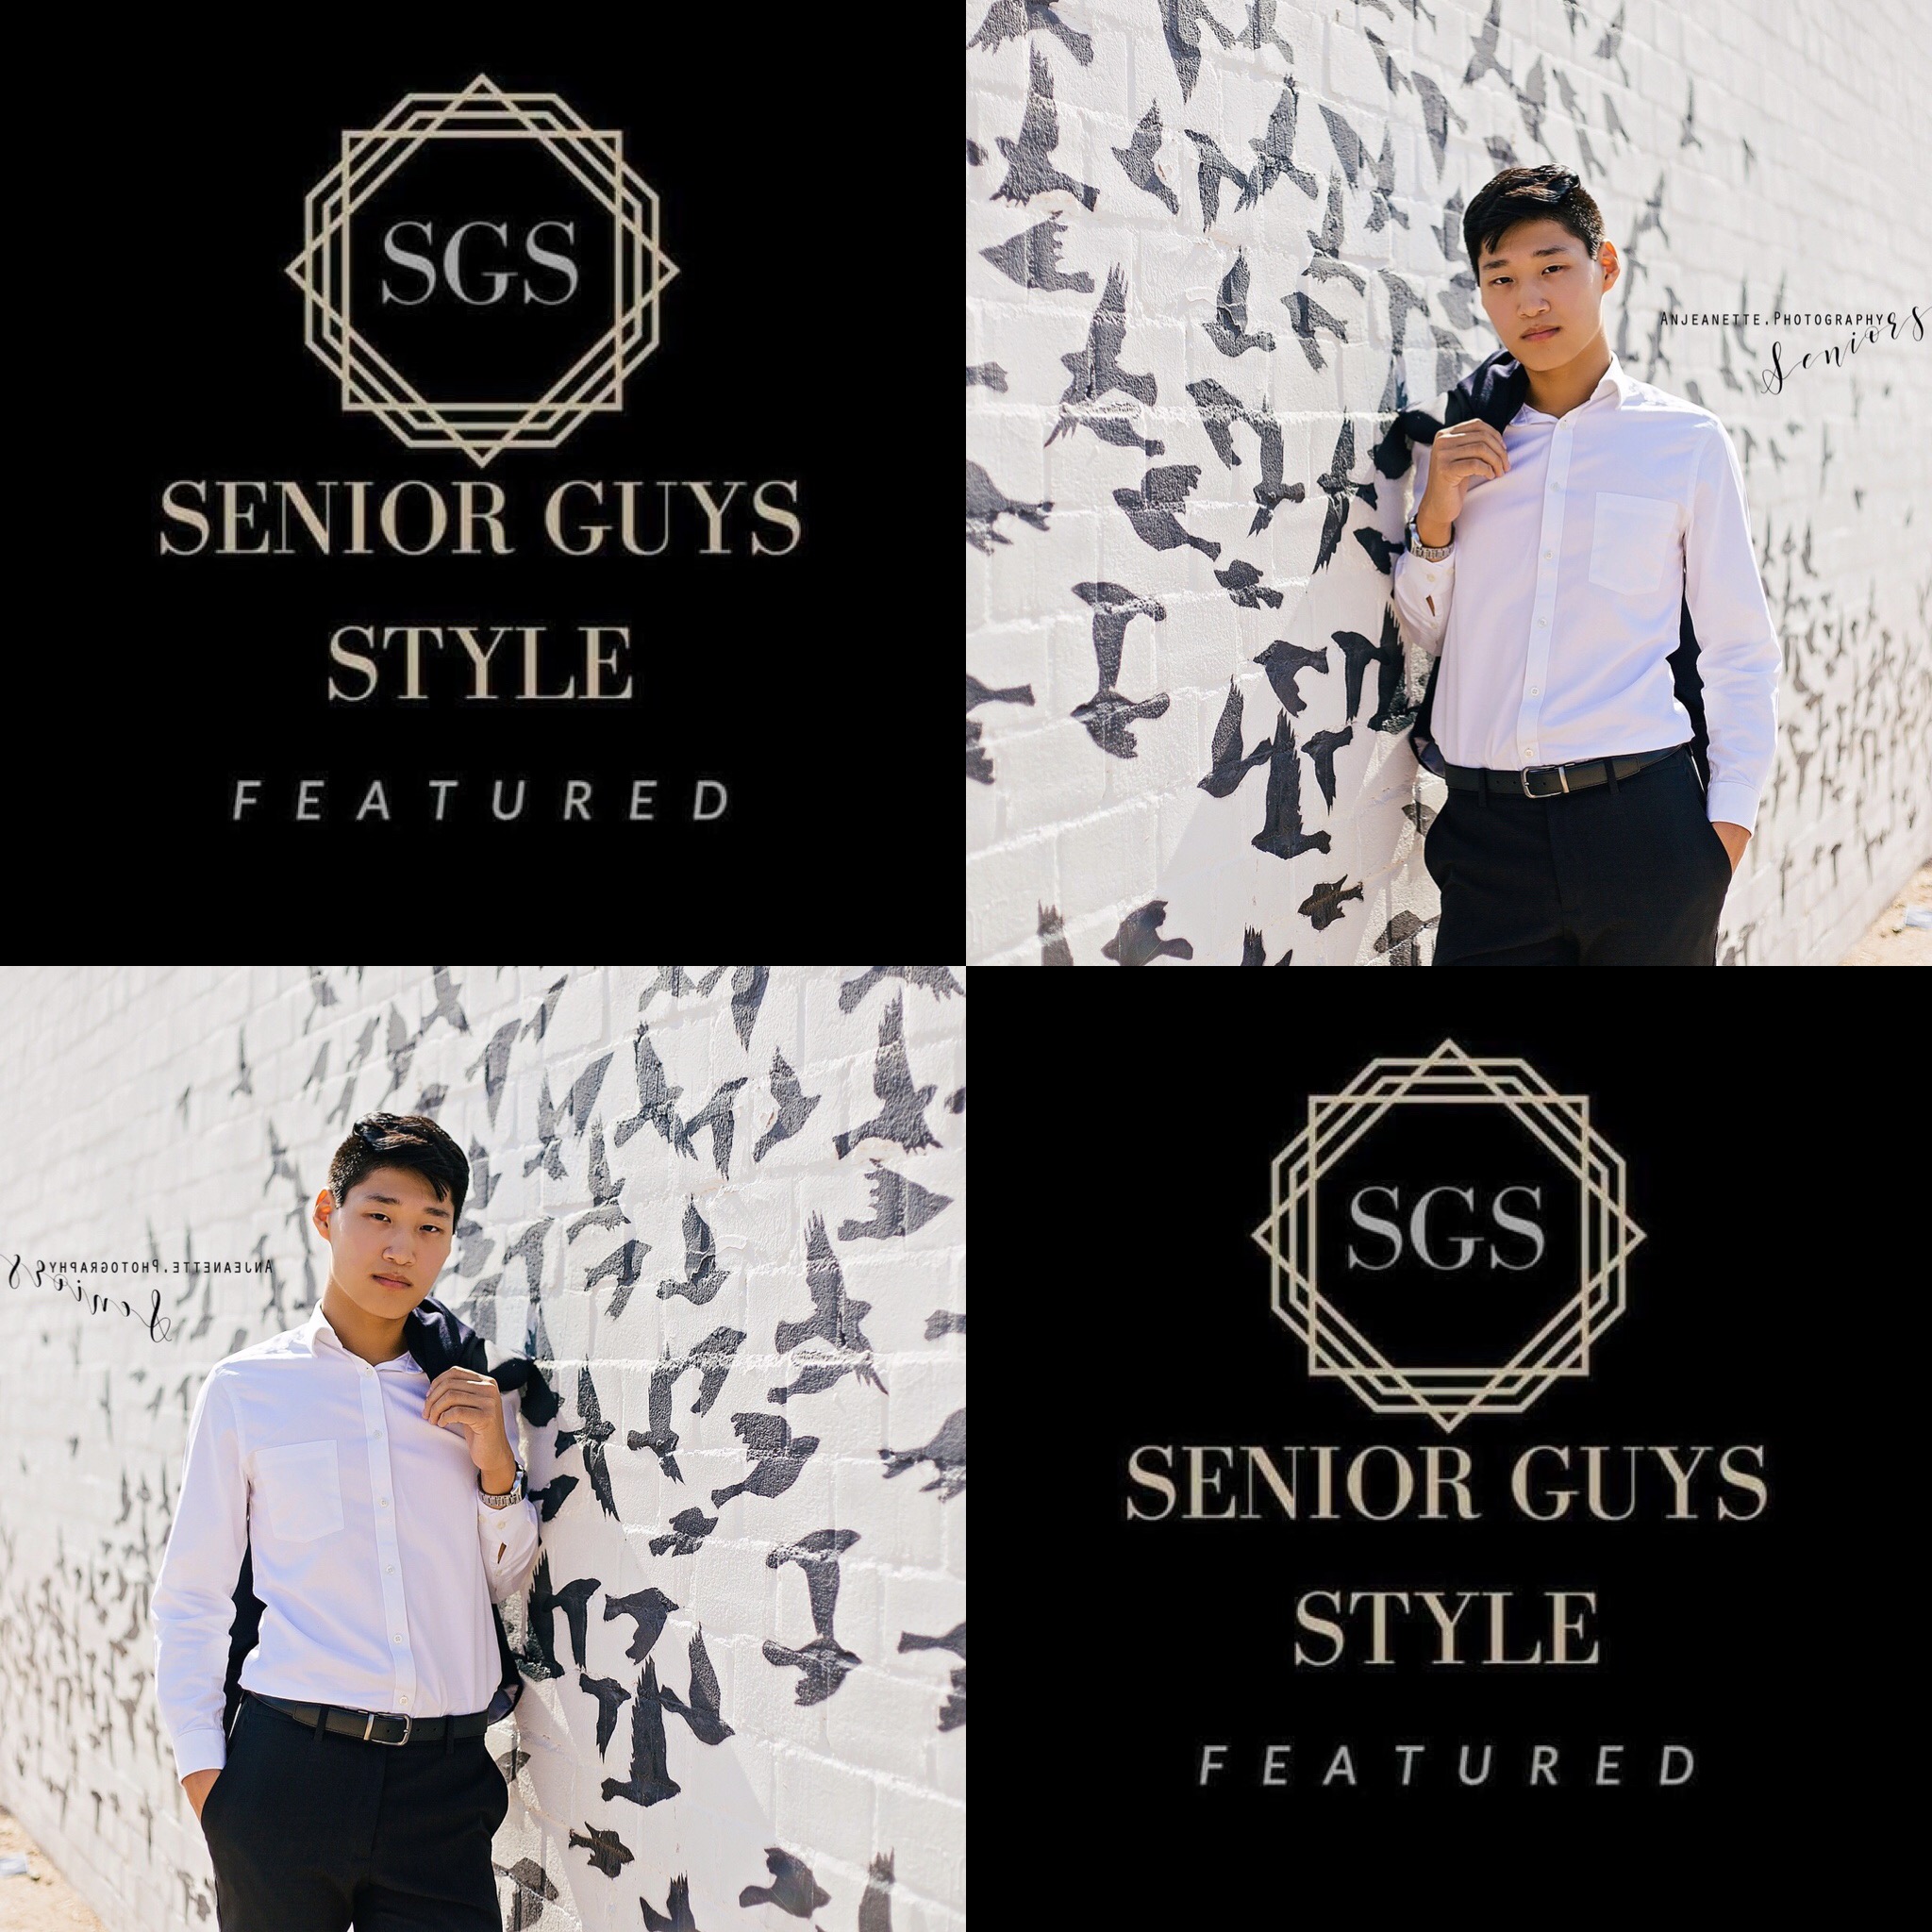 Featured in Senior Guys Style!